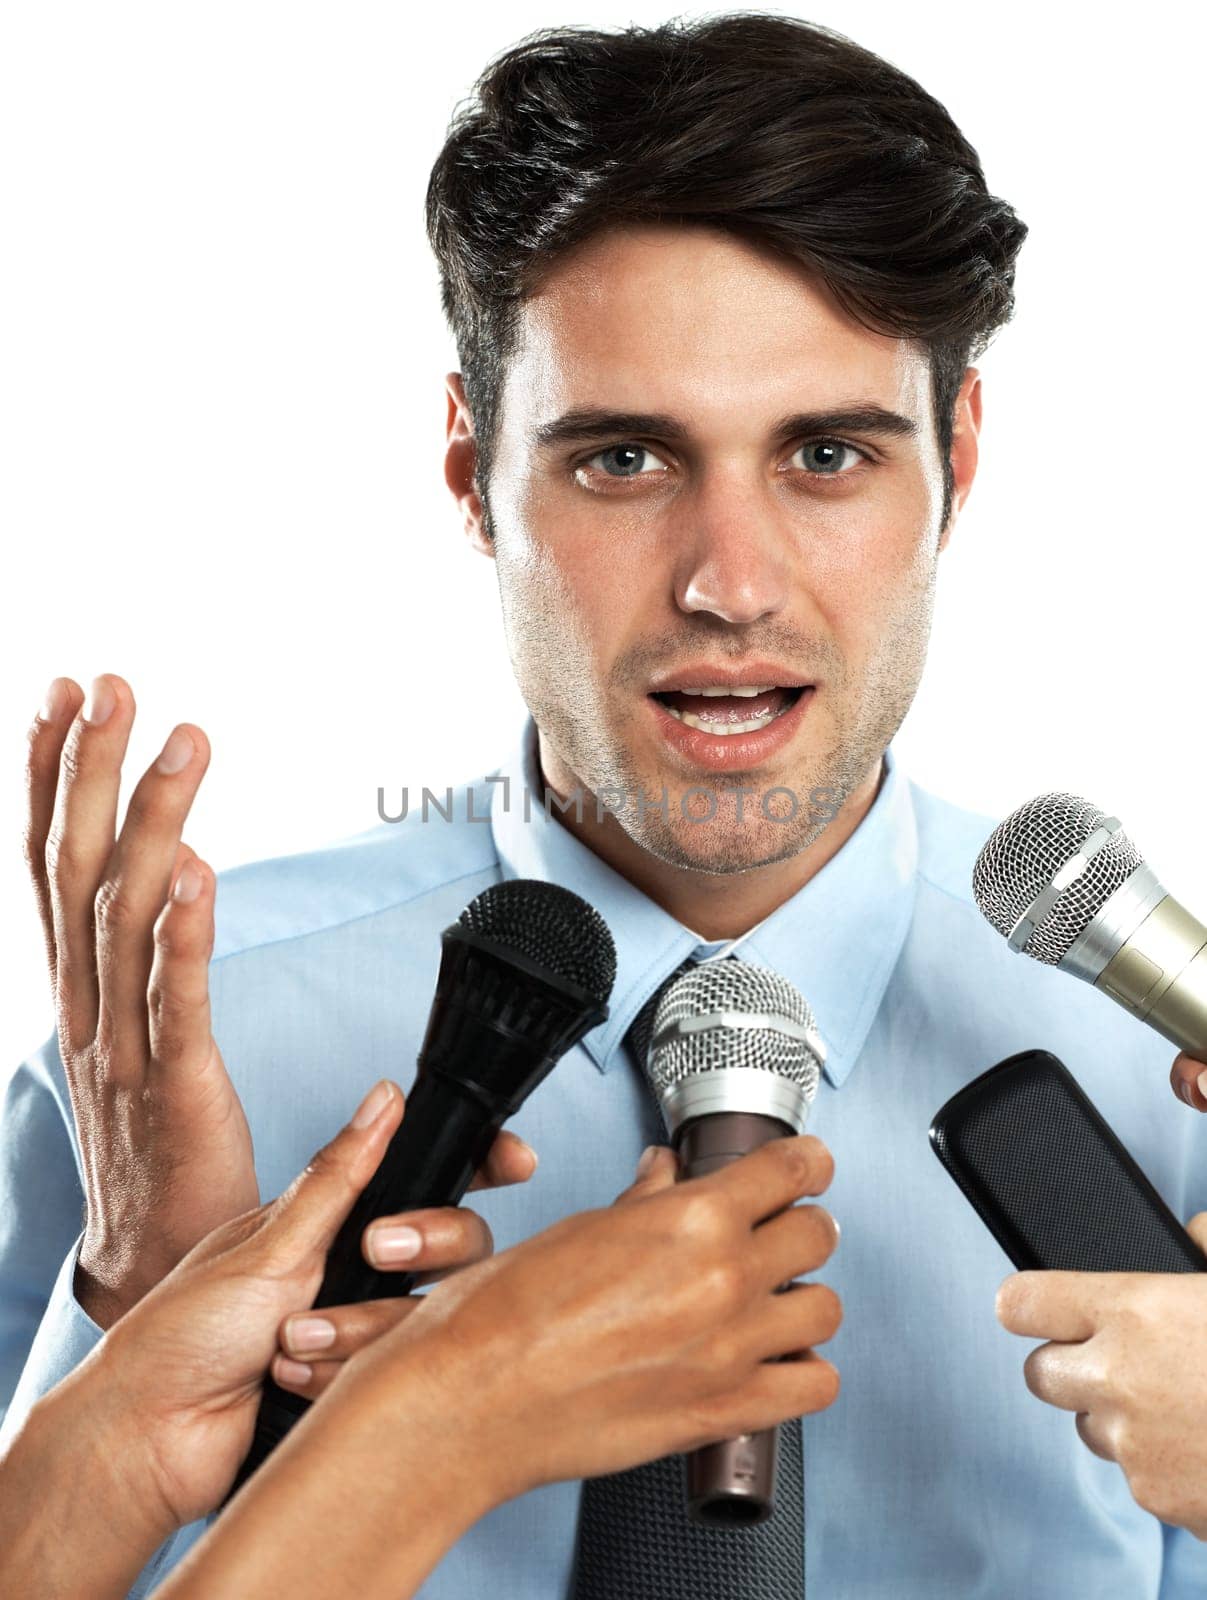 Reporter microphone, portrait and interview for businessman, government worker or speaker. Speech, communication and hands of news journalist asking question to politician on white background studio.